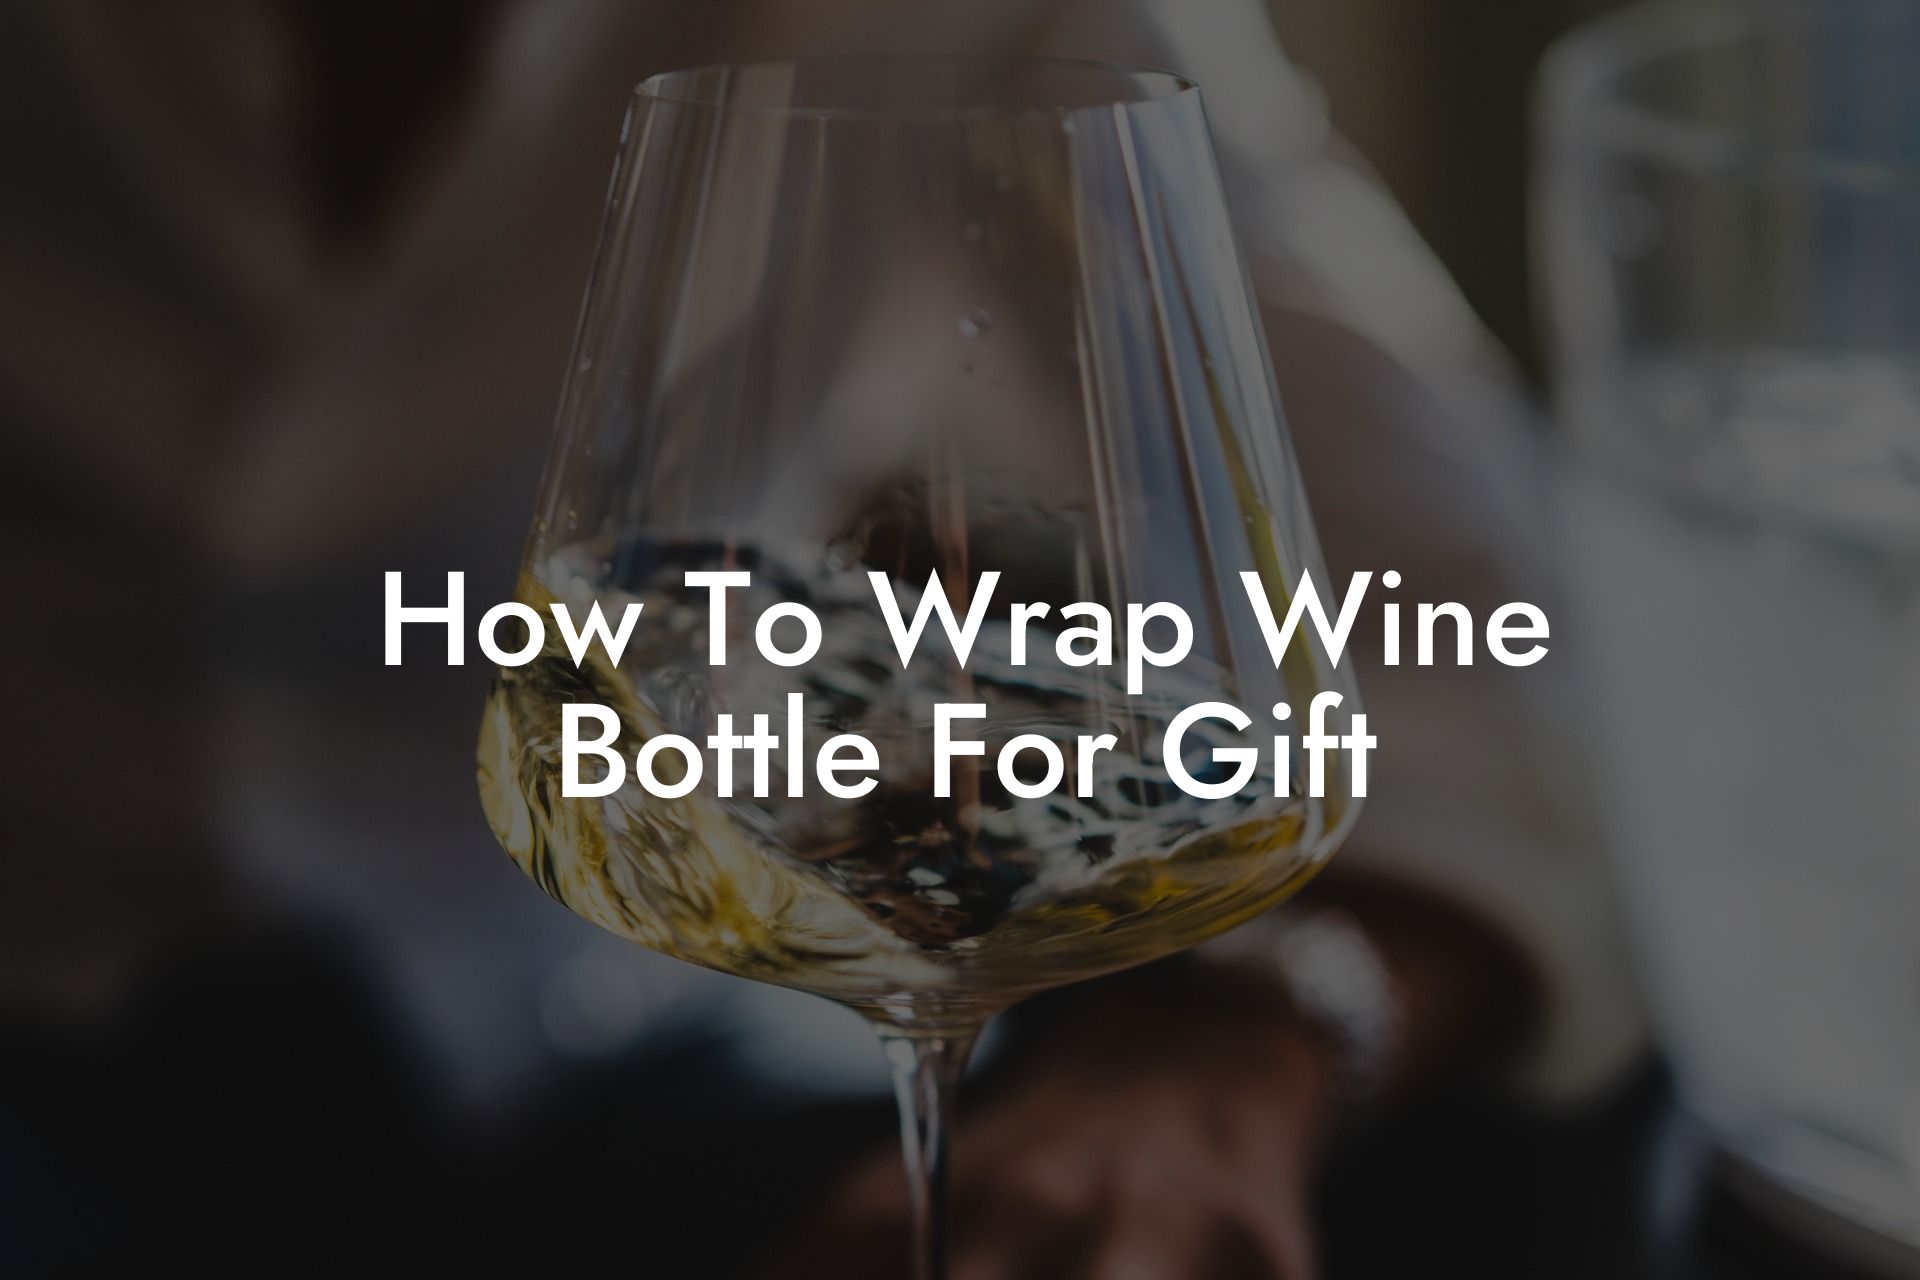 How To Wrap Wine Bottle For Gift